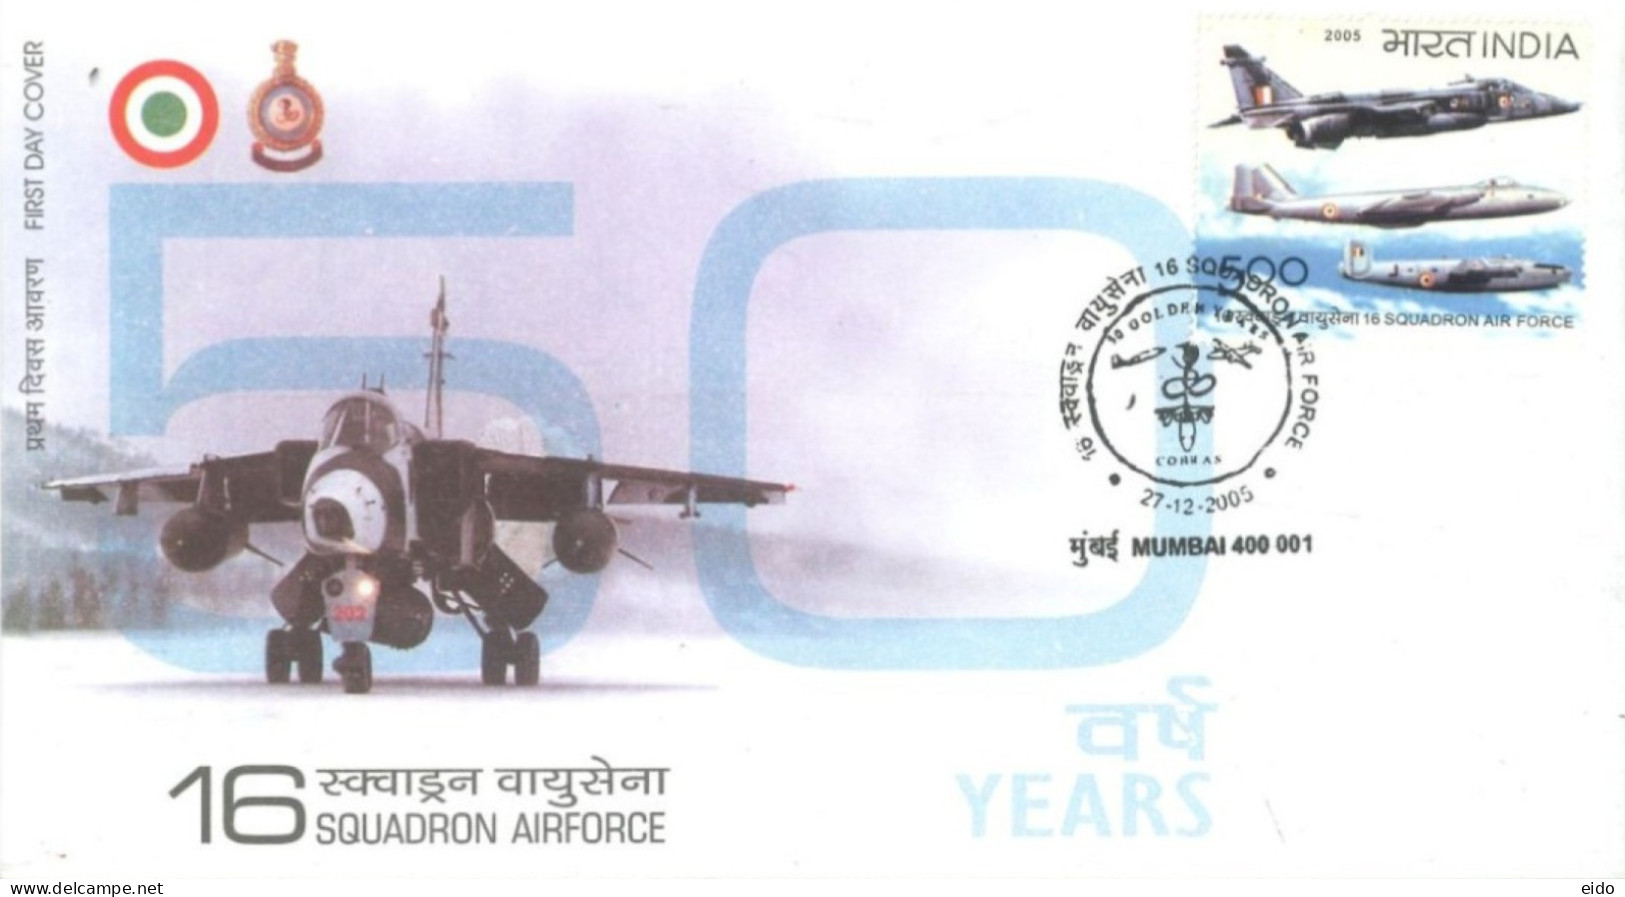 INDIA - 2005 - FDC STAMP OF 16 SQUADRON AIRFORCE. - Briefe U. Dokumente